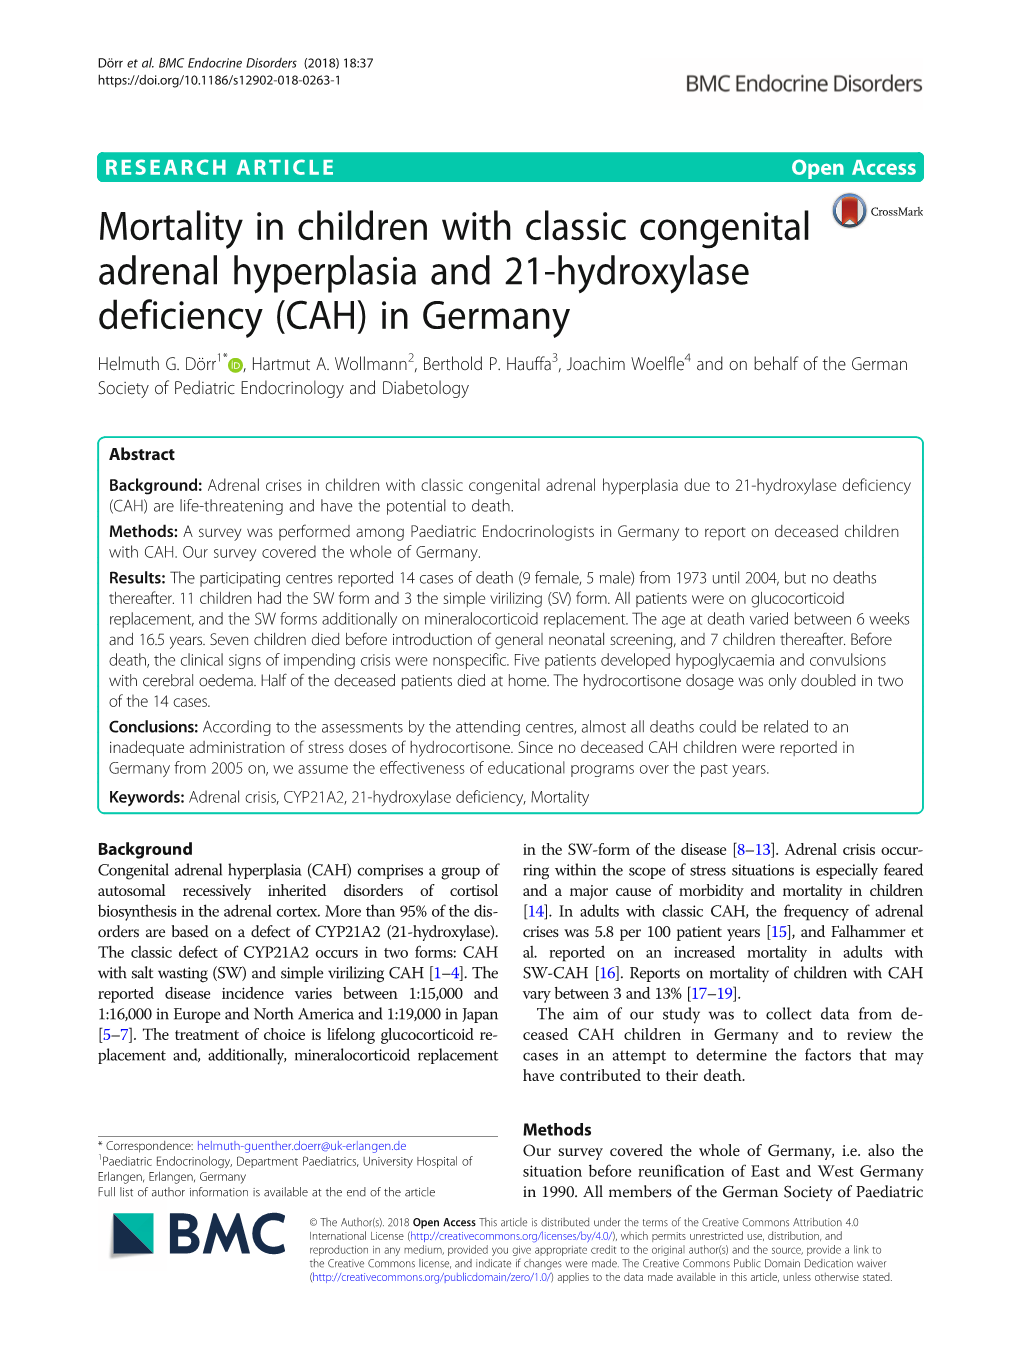 Mortality in Children with Classic Congenital Adrenal Hyperplasia and 21-Hydroxylase Deficiency (CAH) in Germany Helmuth G